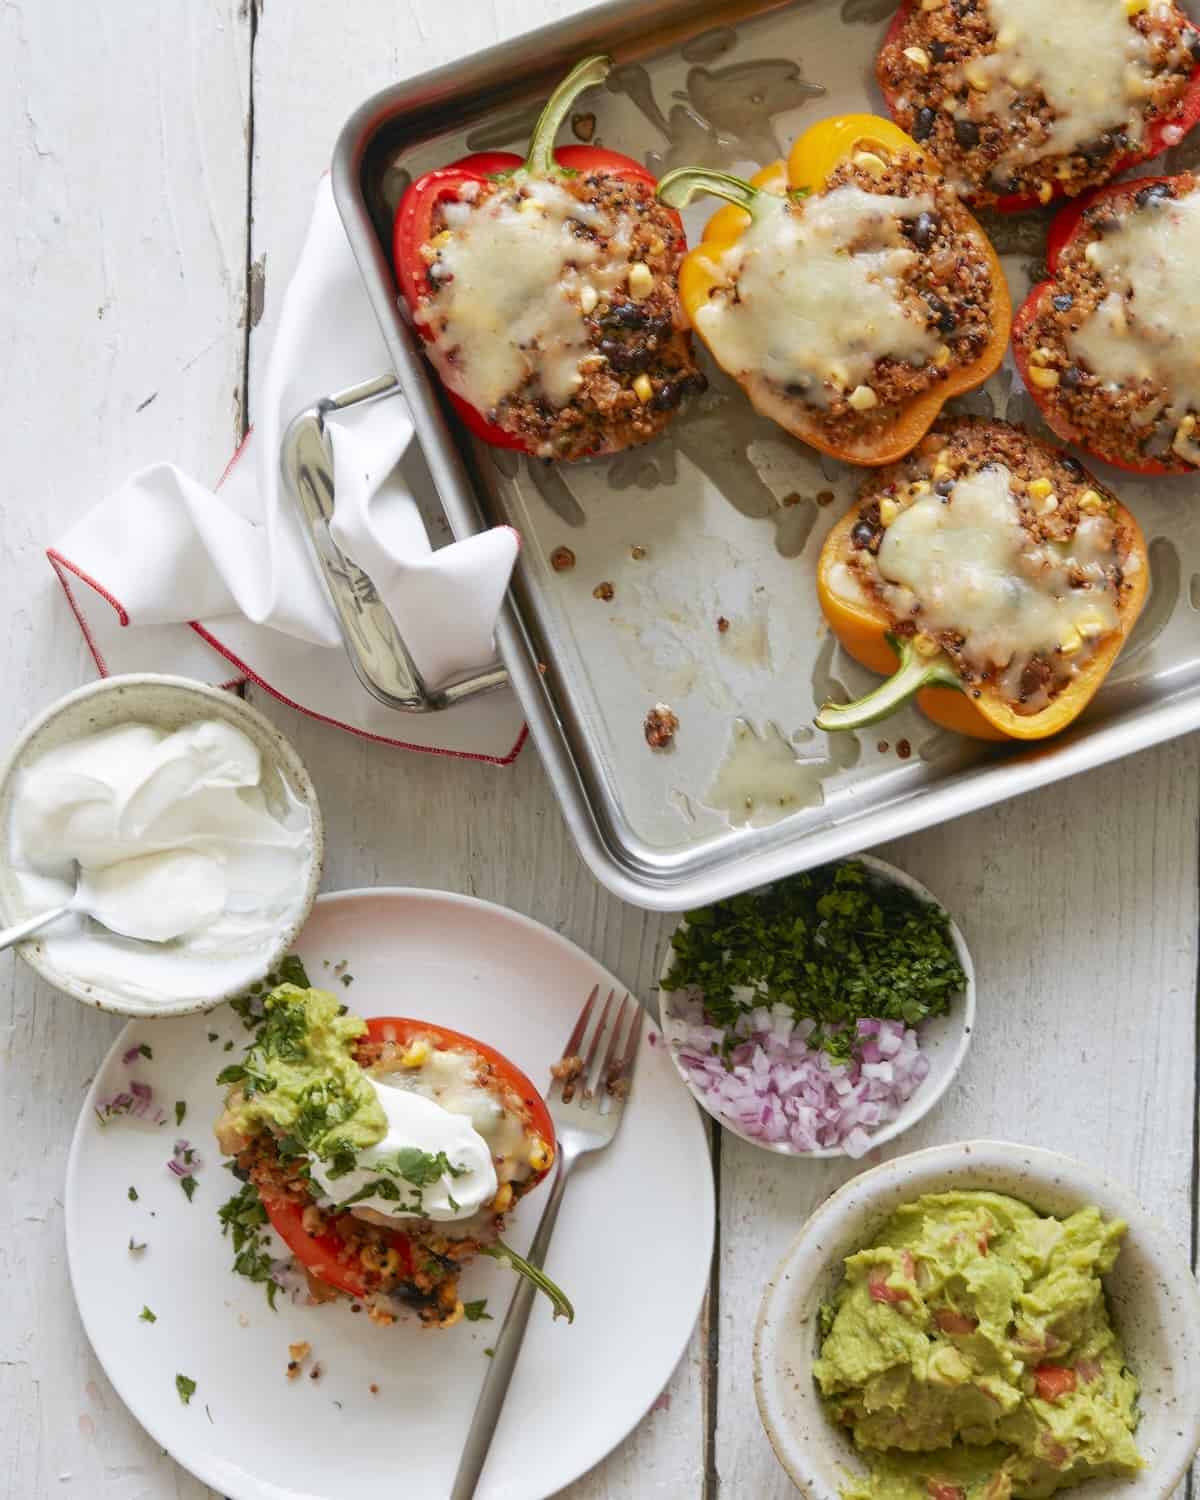 A rectangular deep baking pan with quinoa stuffed peppers, with molten cheese on the top, and three smal bowls of sour cream, guacamole and one with chopped onions and cilantro, on the side, along with a plate and fork with one stuffed pepper served.